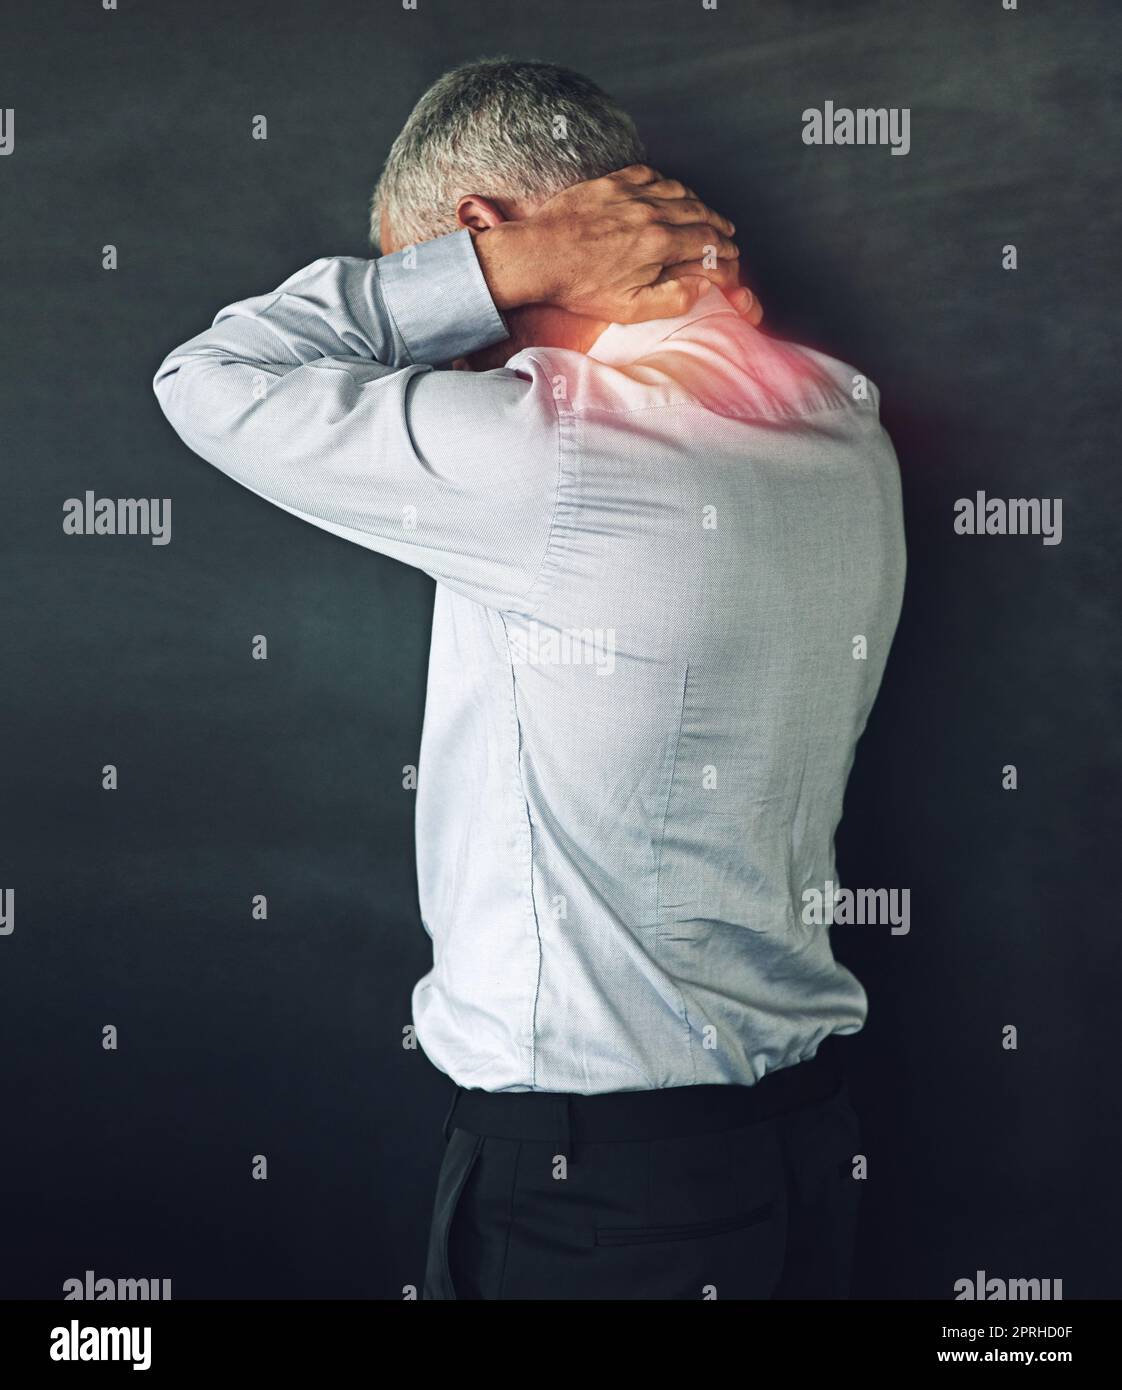 When pain strikes. Studio shot of a mature man experiencing neck ache against a black background. Stock Photo